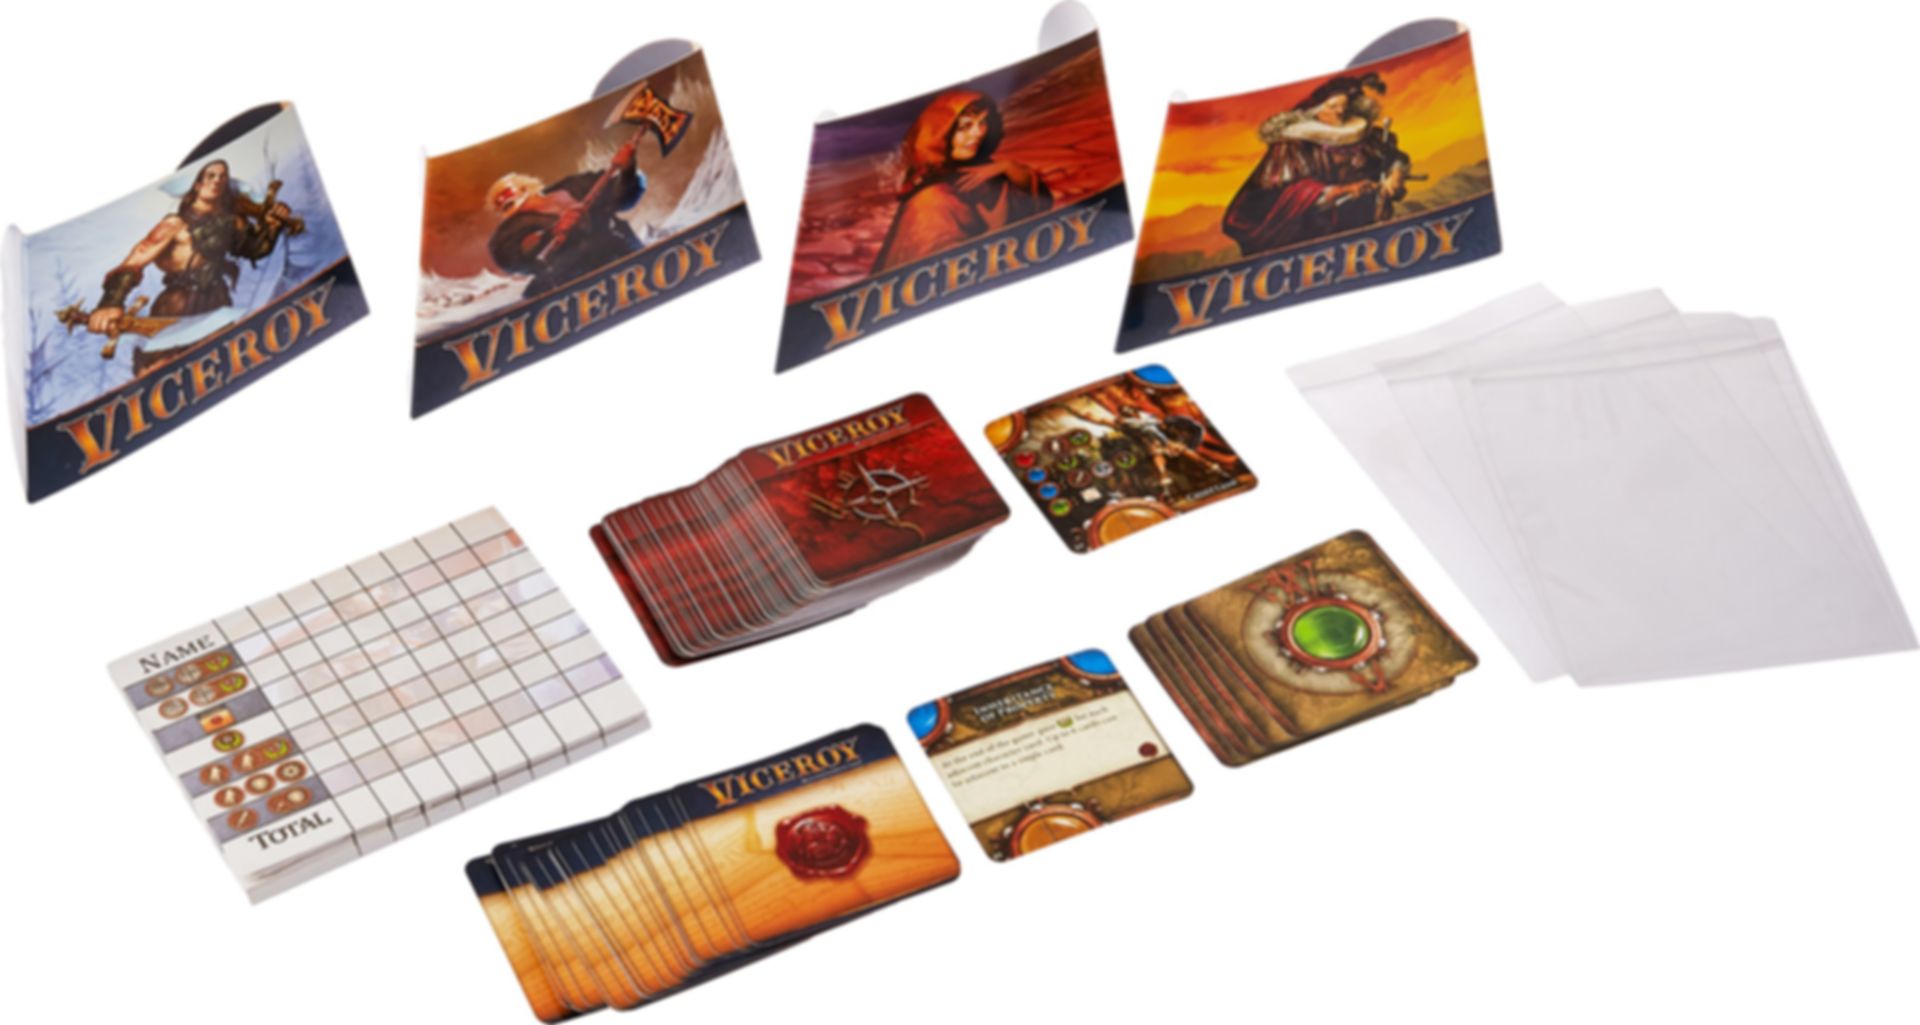 Viceroy components